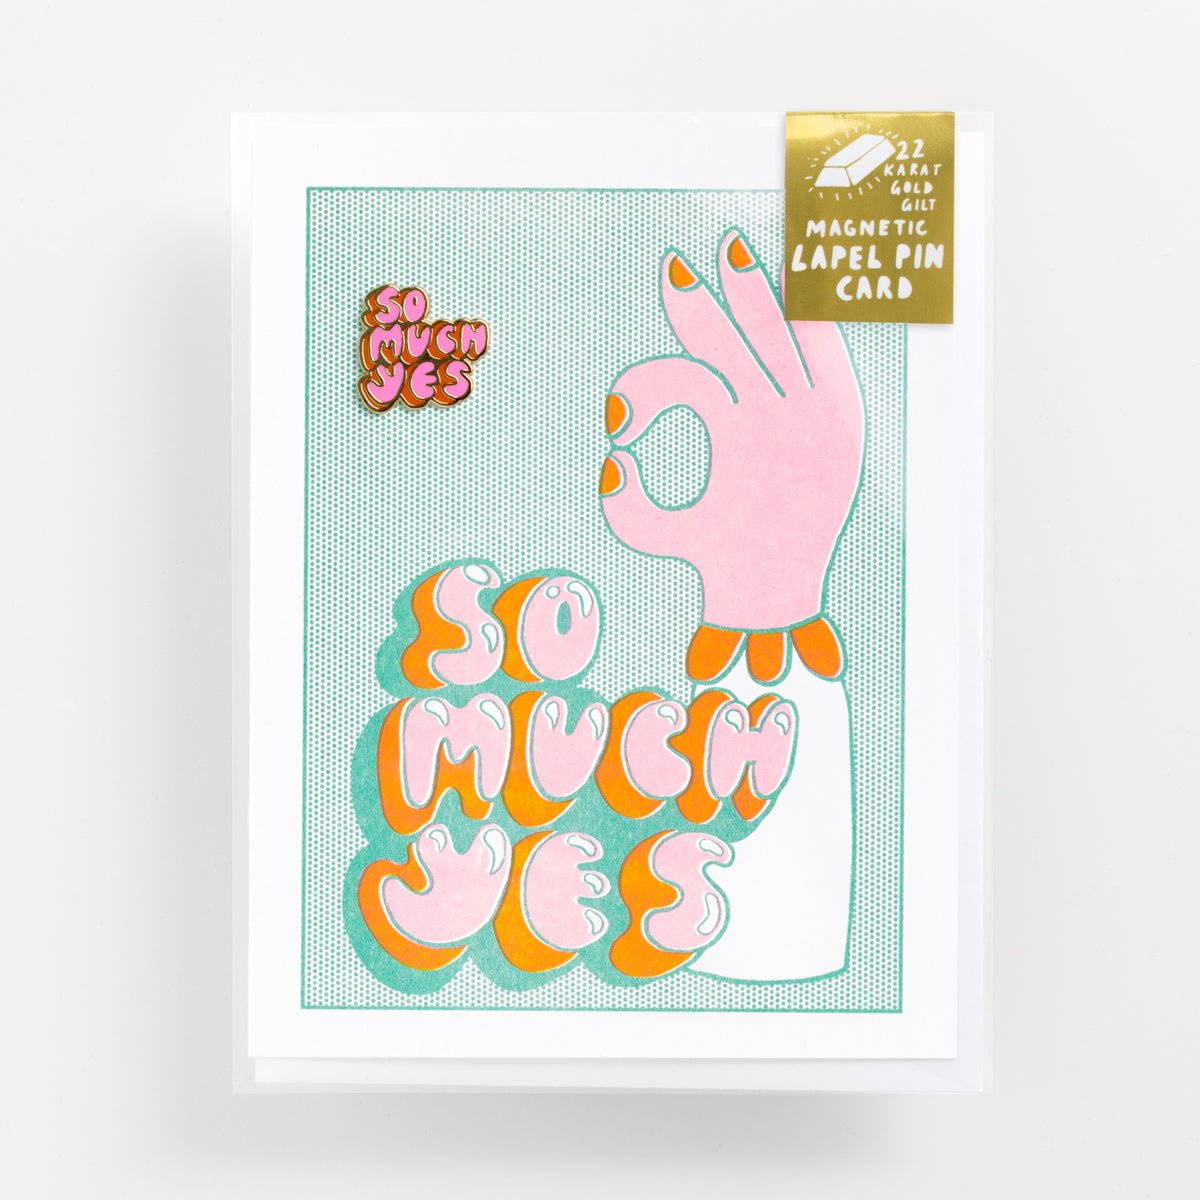 So Much Yes - Lapel Pin Card - Yellow Owl Workshop